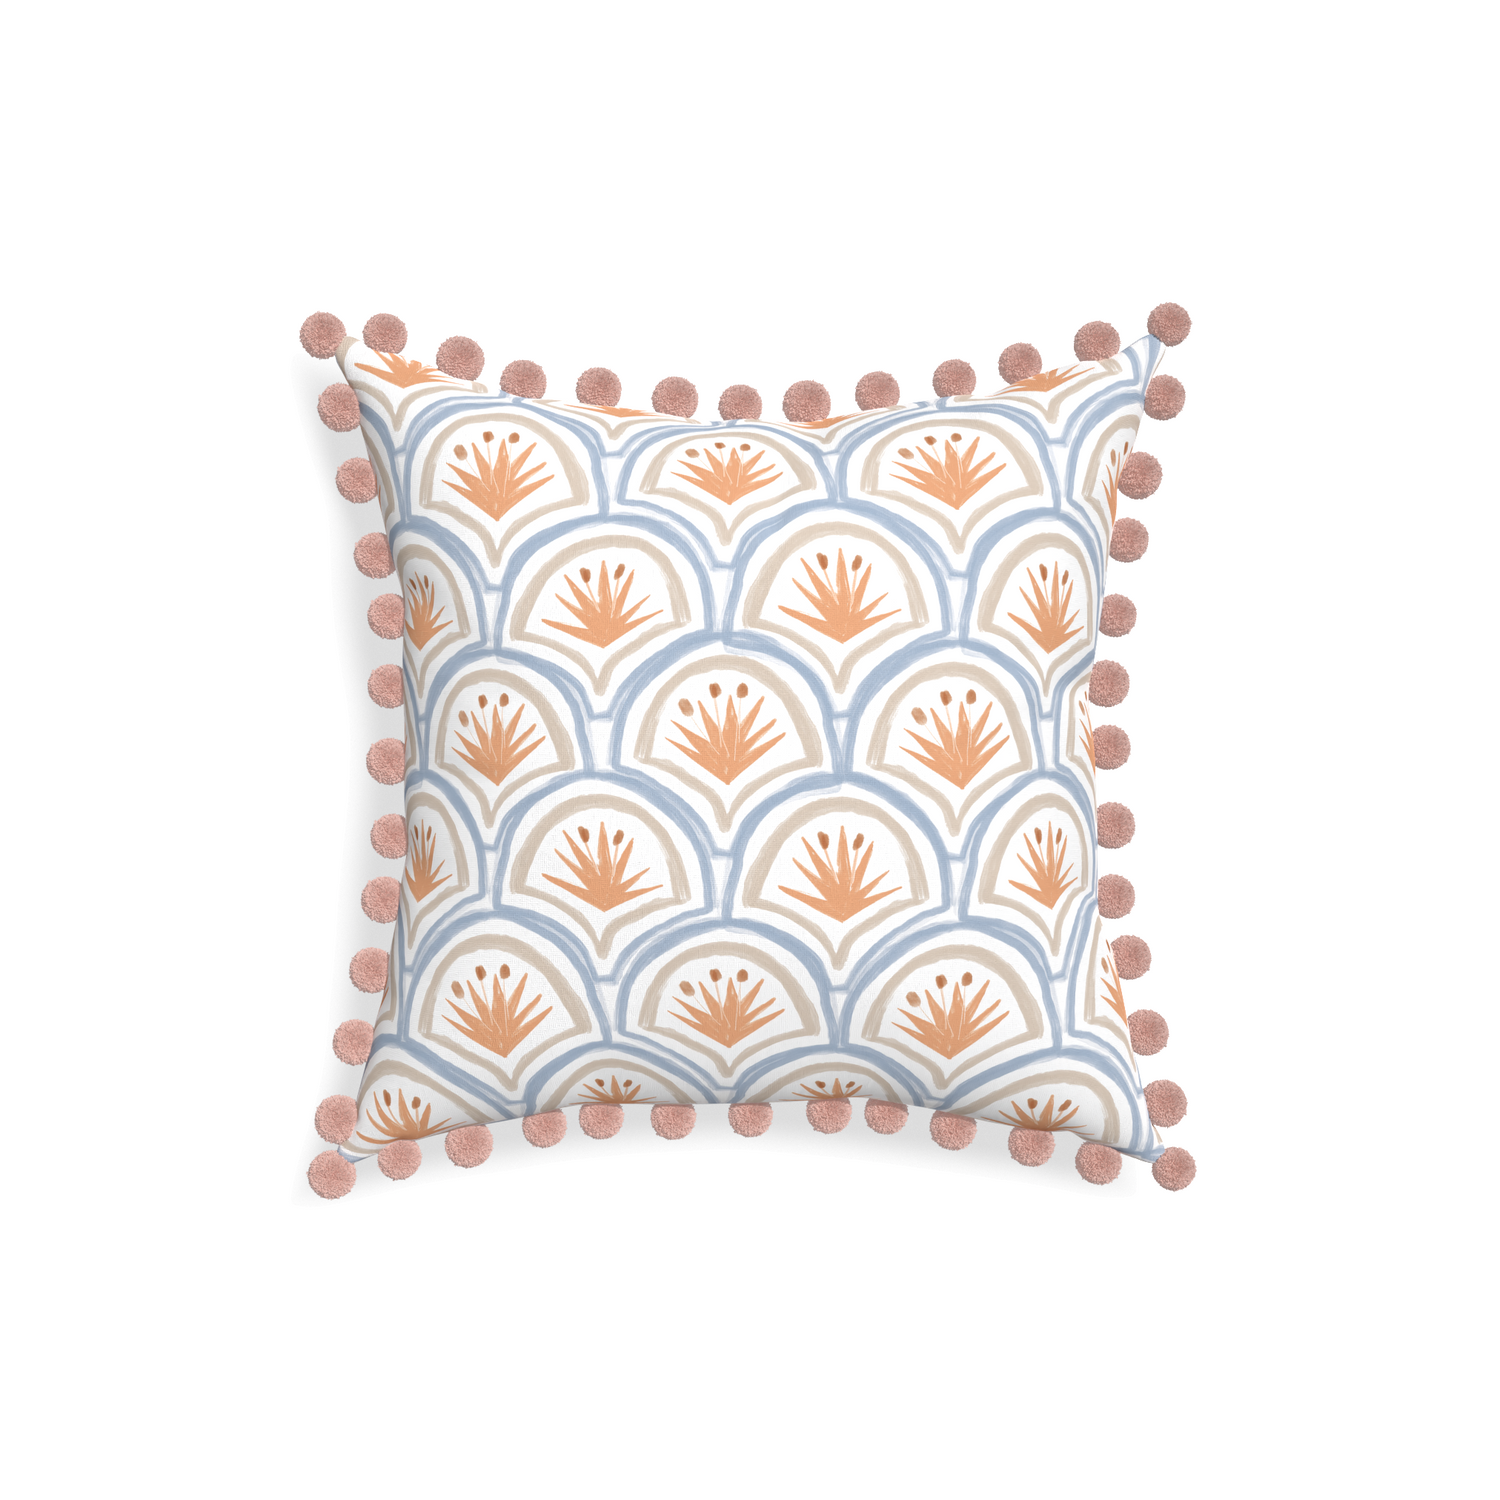 18-square thatcher apricot custom art deco palm patternpillow with rose pom pom on white background